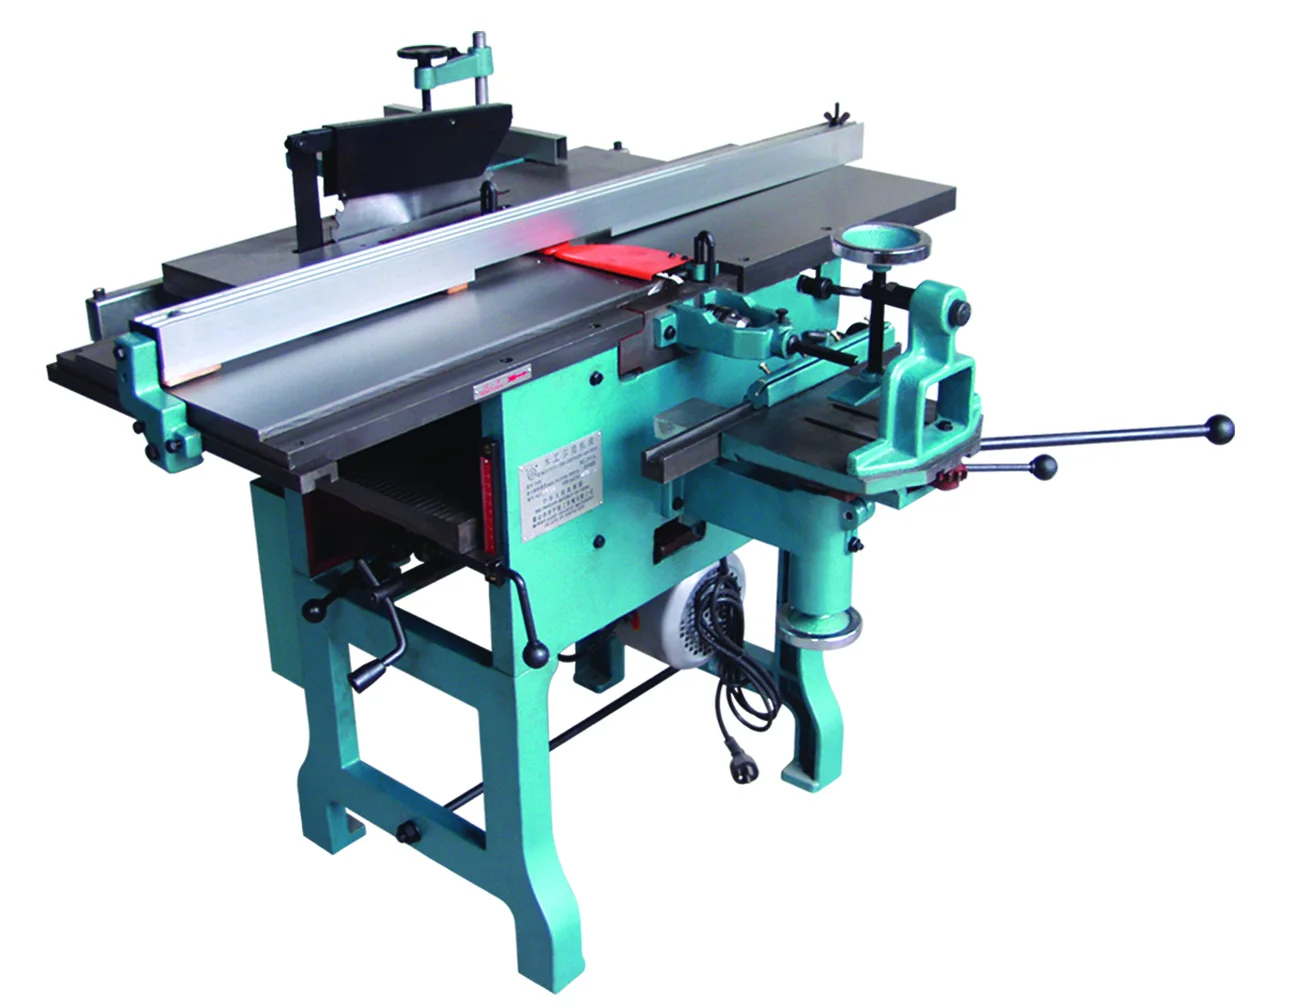 Ten Functions In One Combine Woodworking Machine Ml393a Planning Width 300mm Buy Surface Planer Combined With Circular Saw Wood Thicknesser And Planer Multiuse Planer Product On Alibaba Com